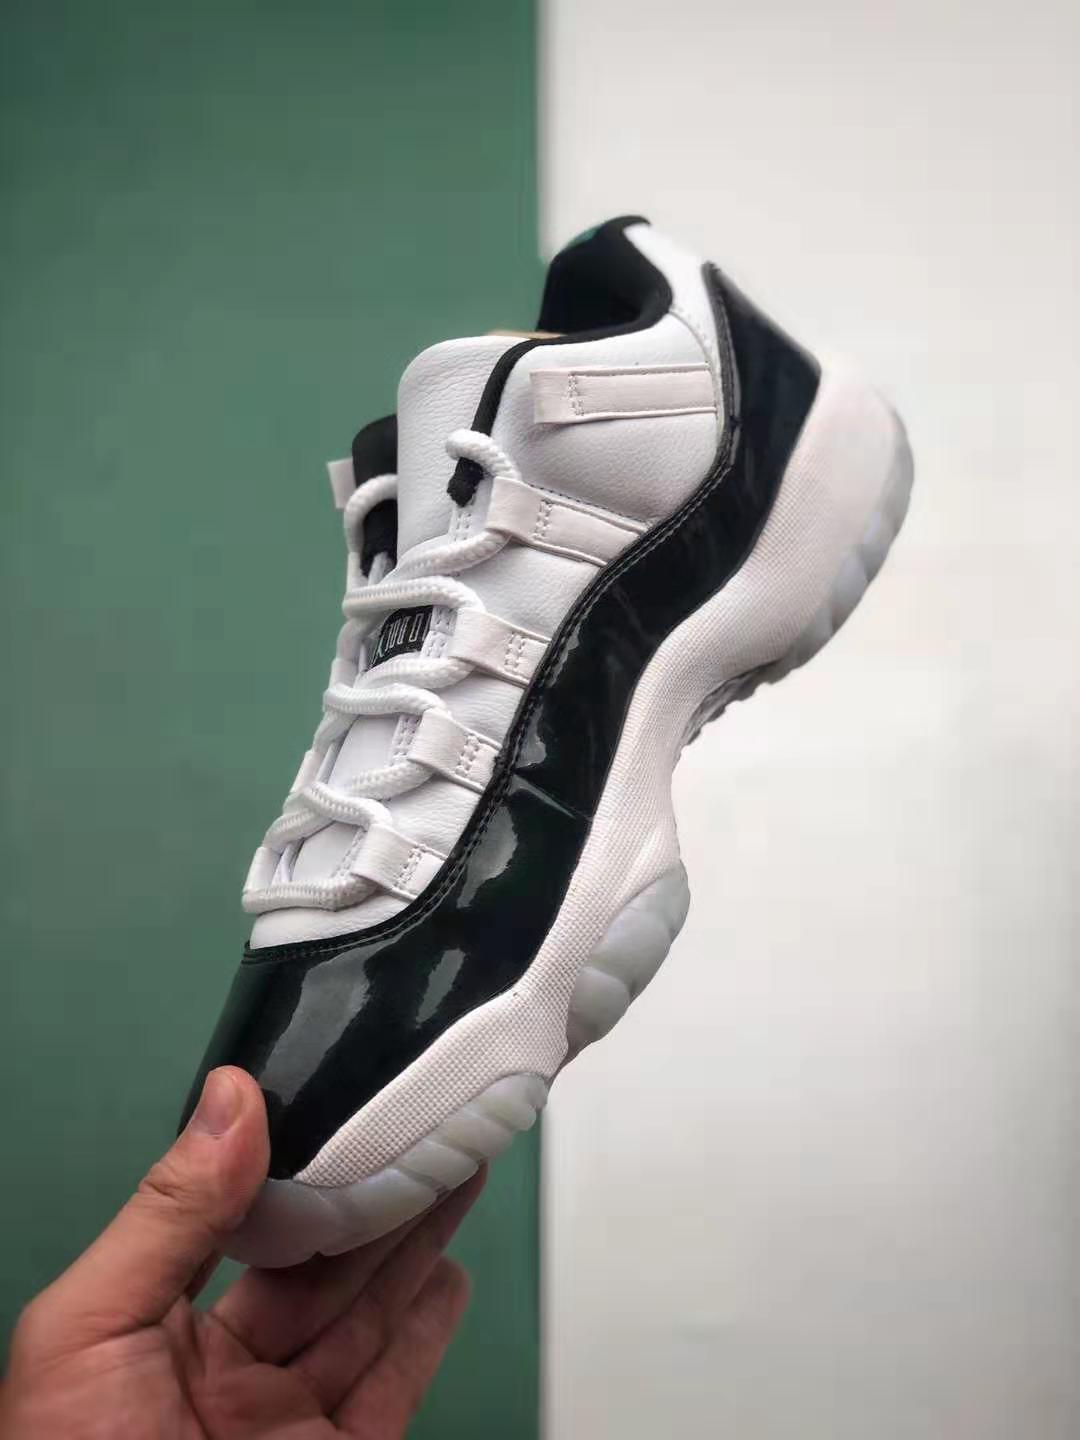 Air Jordan 11 Retro Low 'Emerald' 528895-145 - Stylish and Authentic Sneakers for Sale